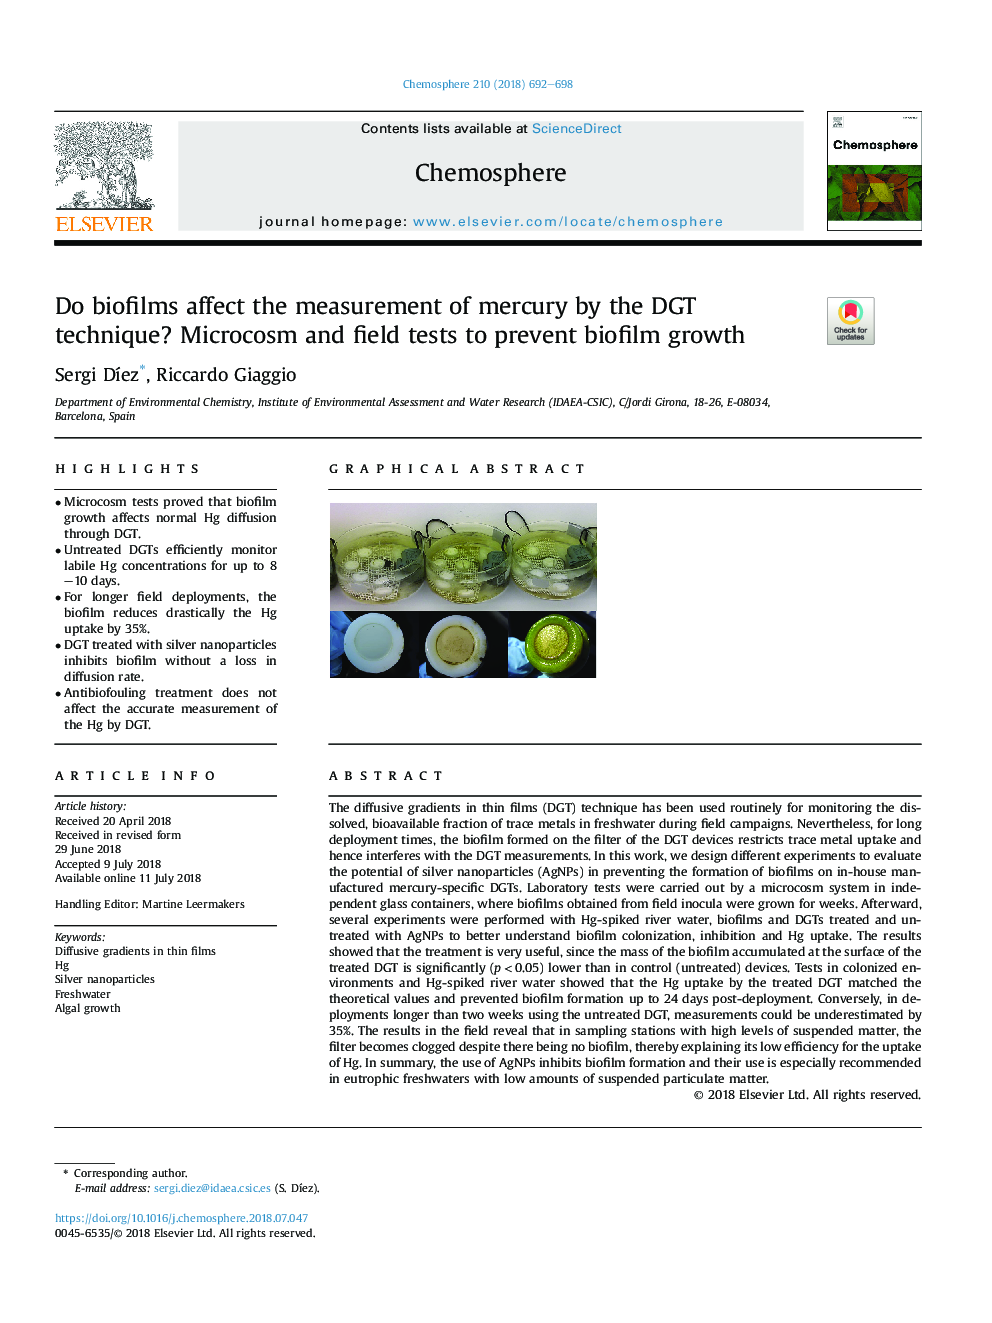 Do biofilms affect the measurement of mercury by the DGT technique? Microcosm and field tests to prevent biofilm growth